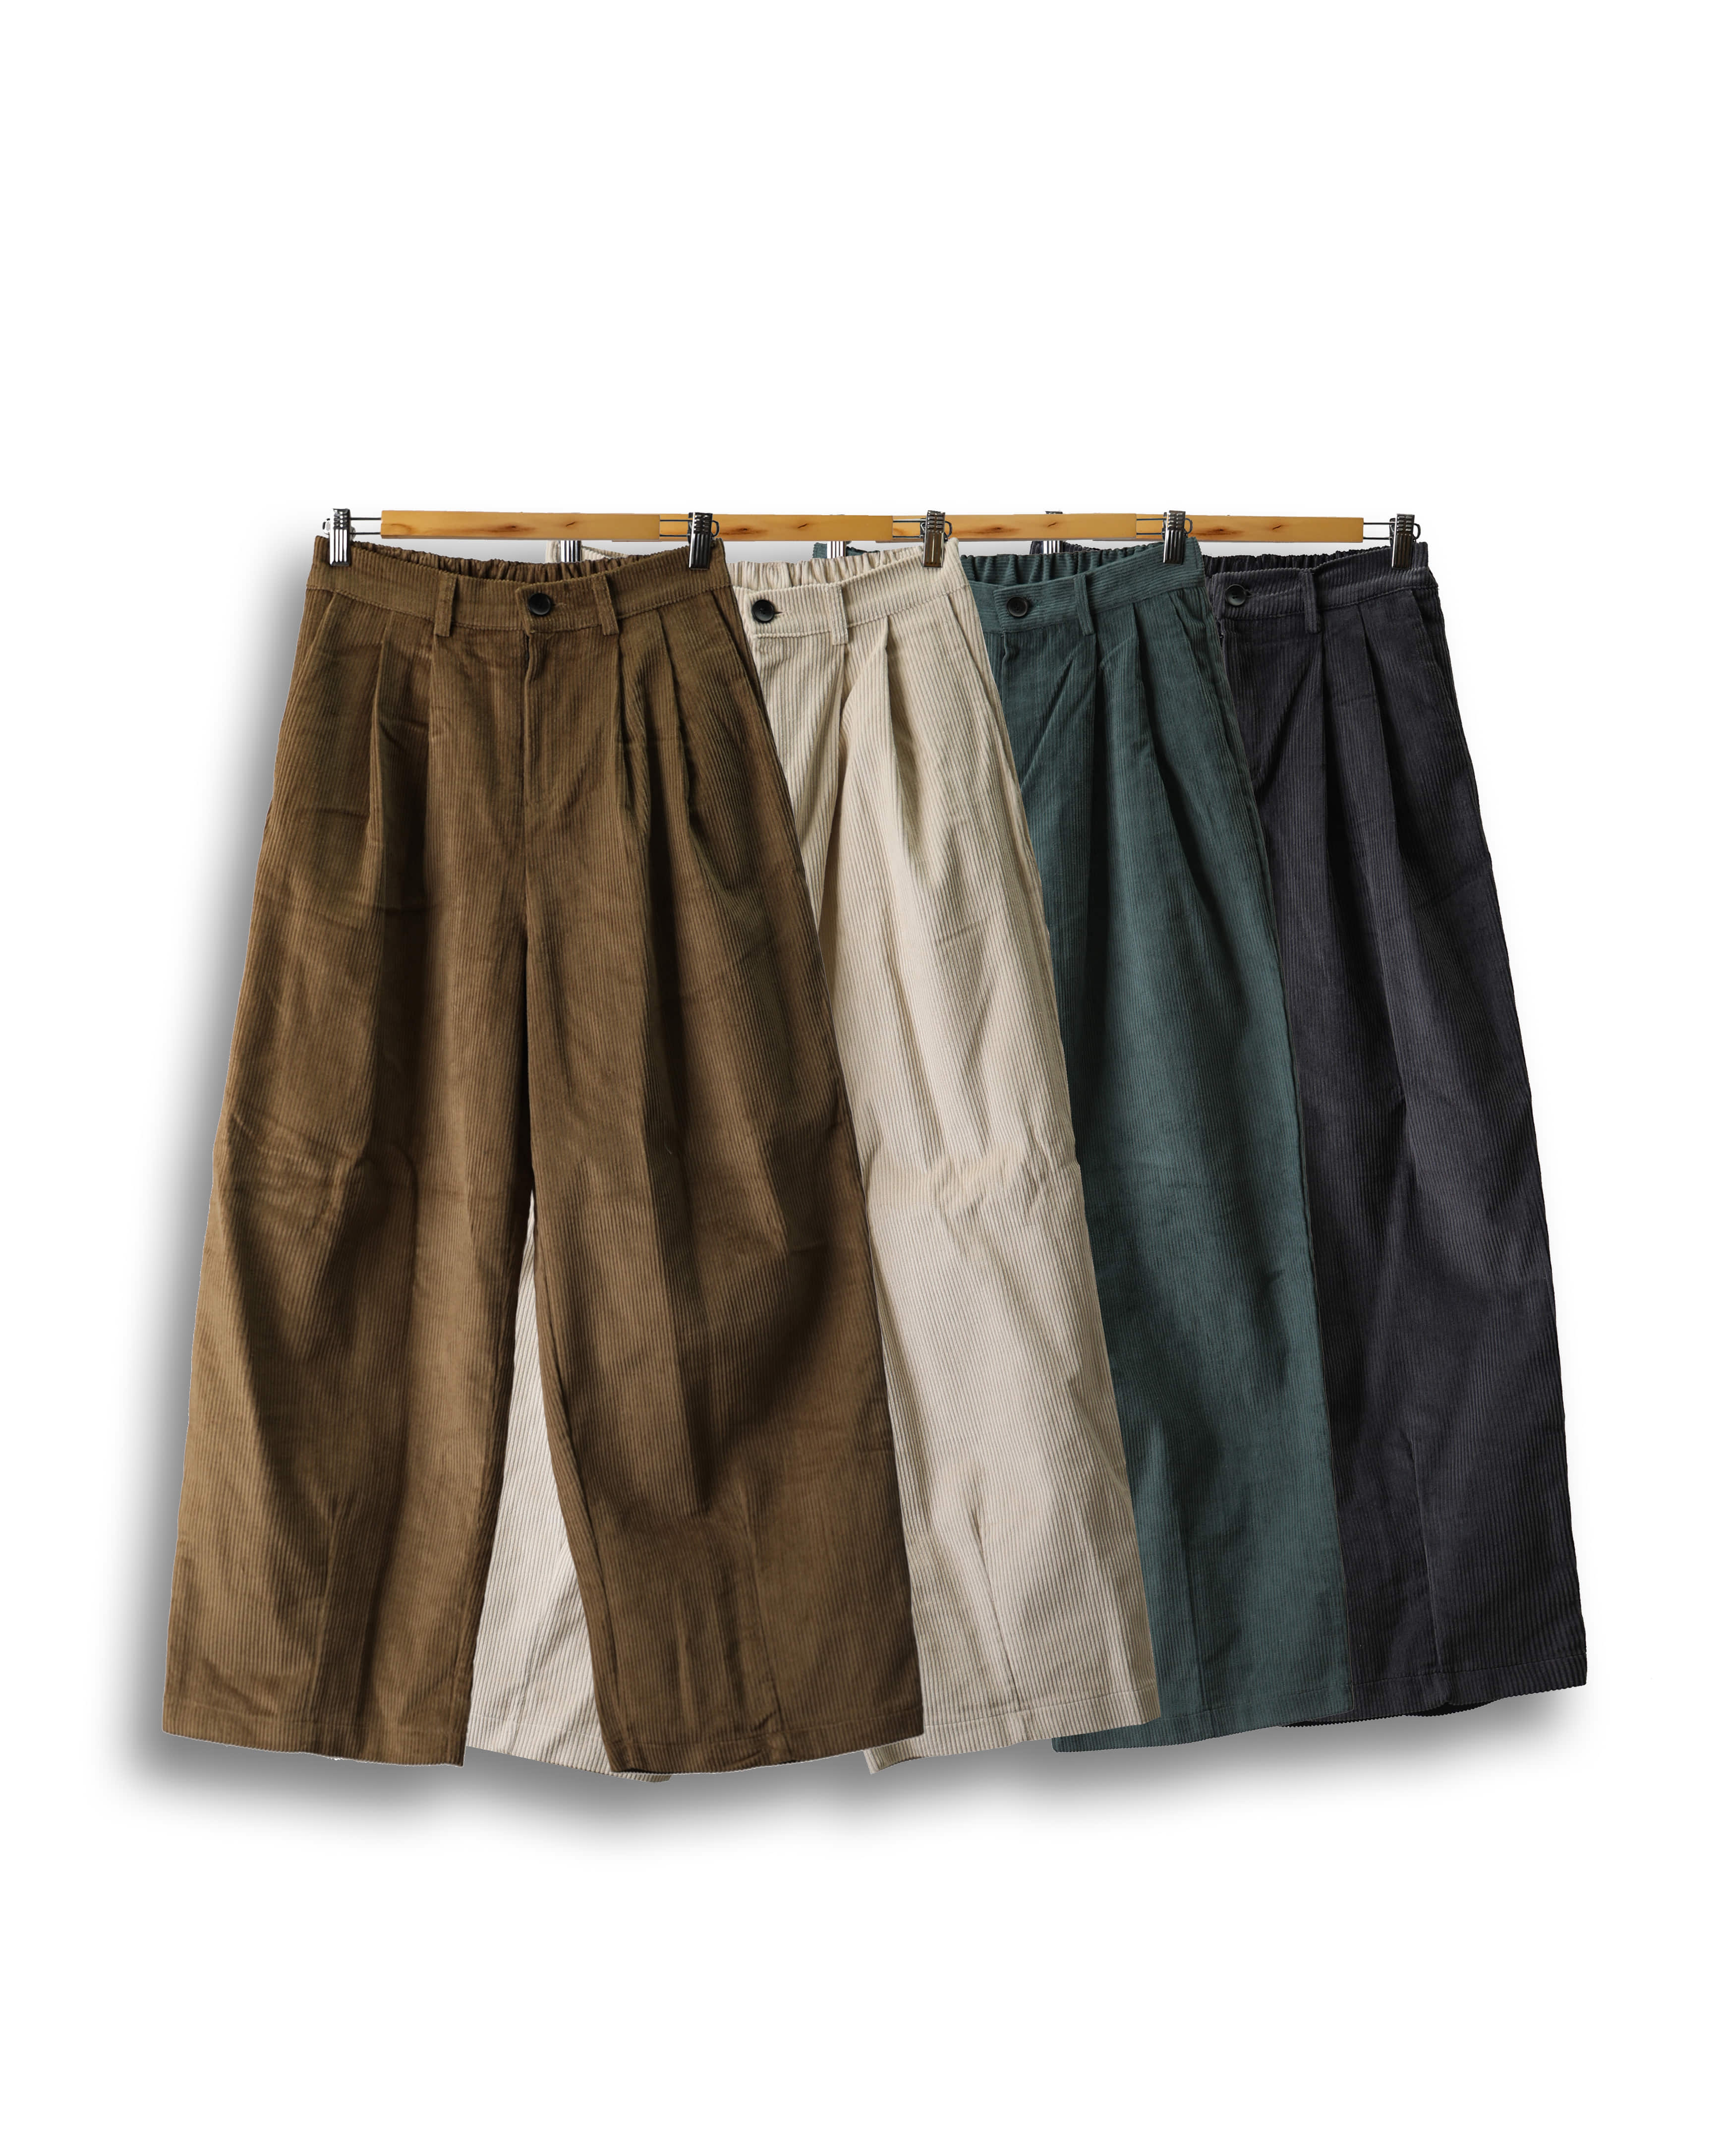 DENS Two Tuck Cord Balloon Pants (Charcoal/Blue Green/Beige/Ivory)